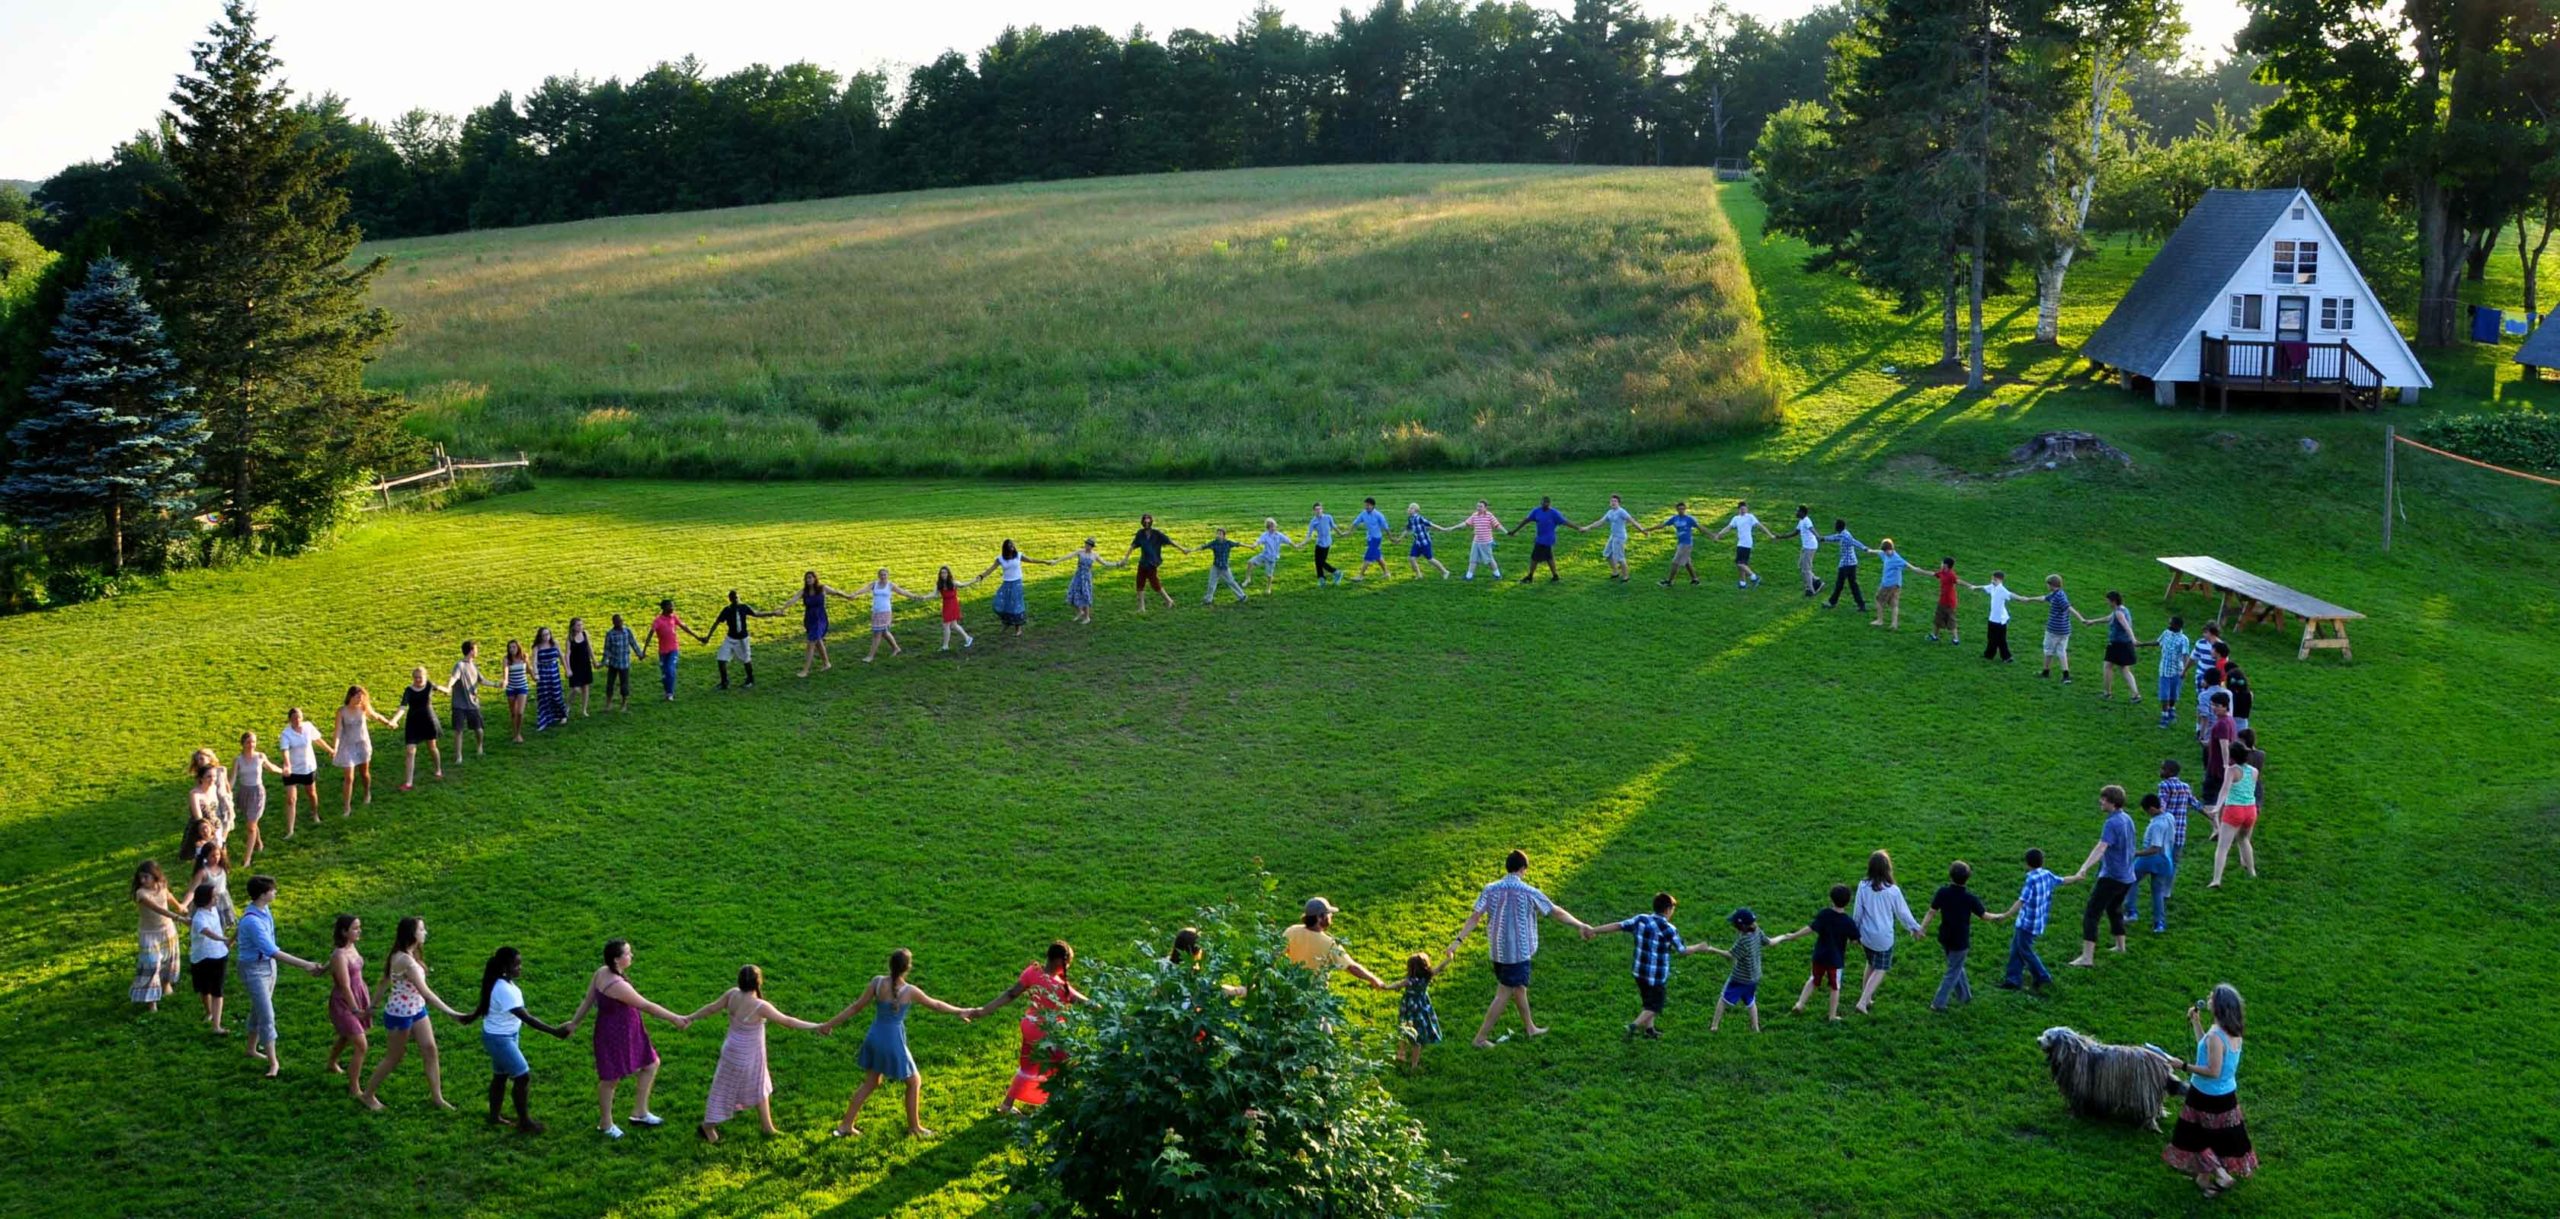 A view of people standing in a circle holding hands in a green field